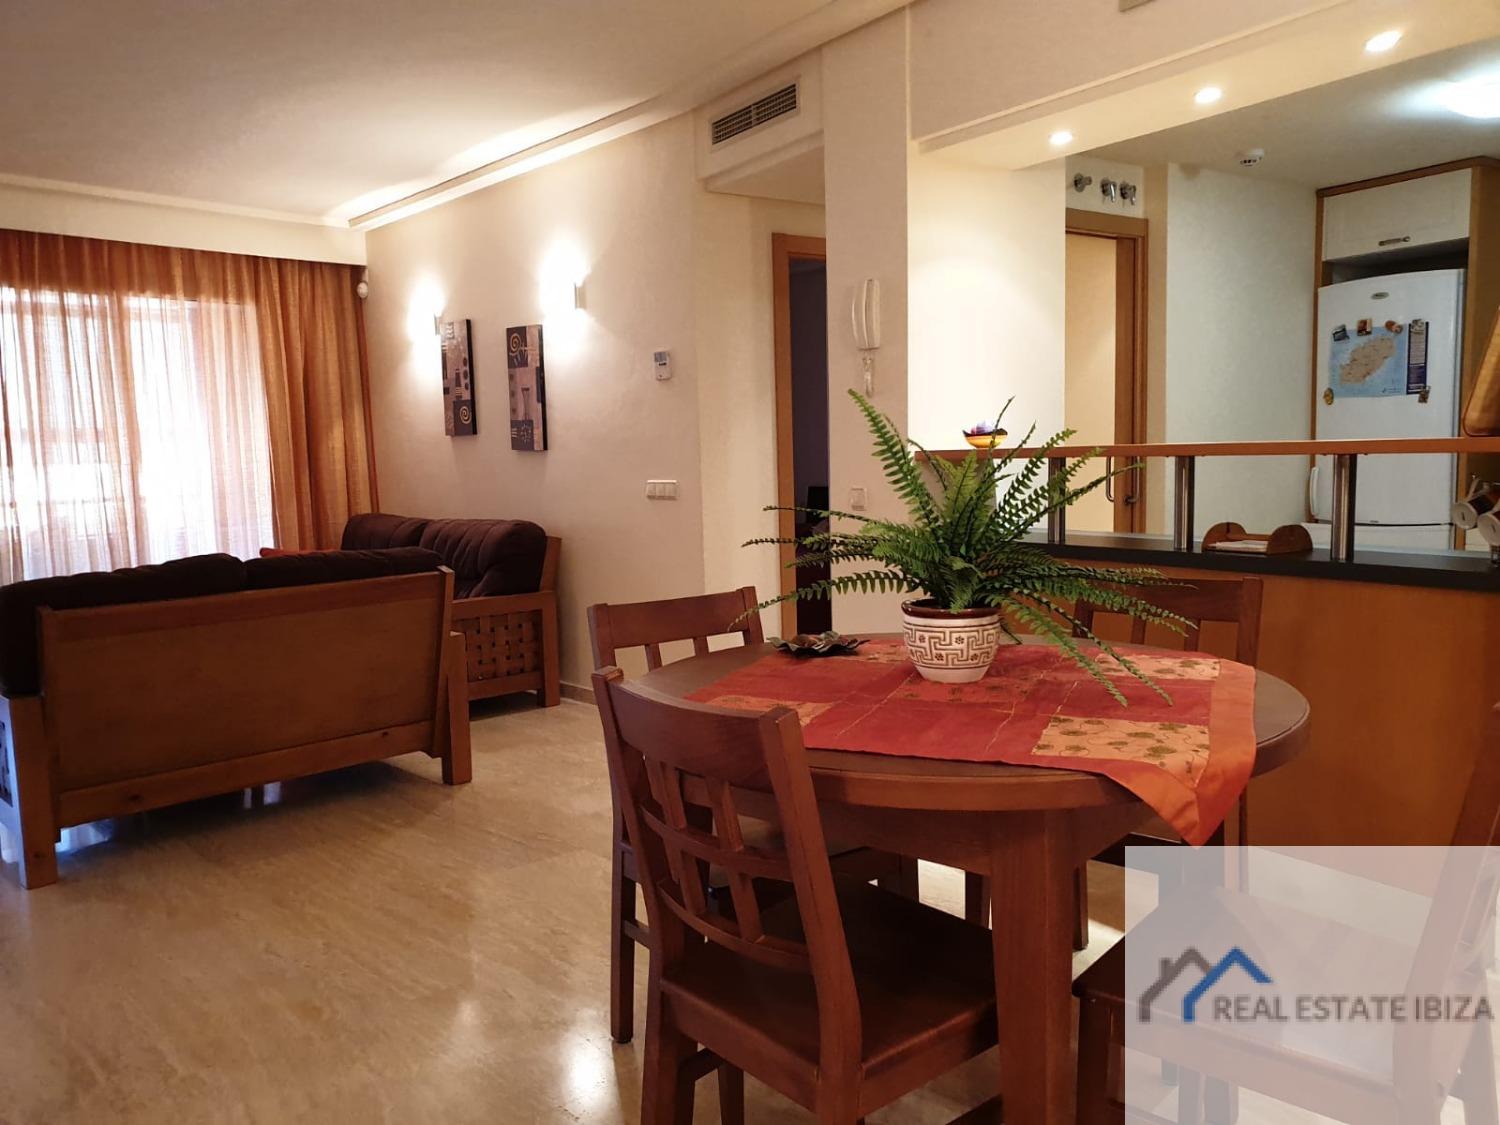 Beautiful and spacious three-bedroom apartment for sale in Roca Llisa